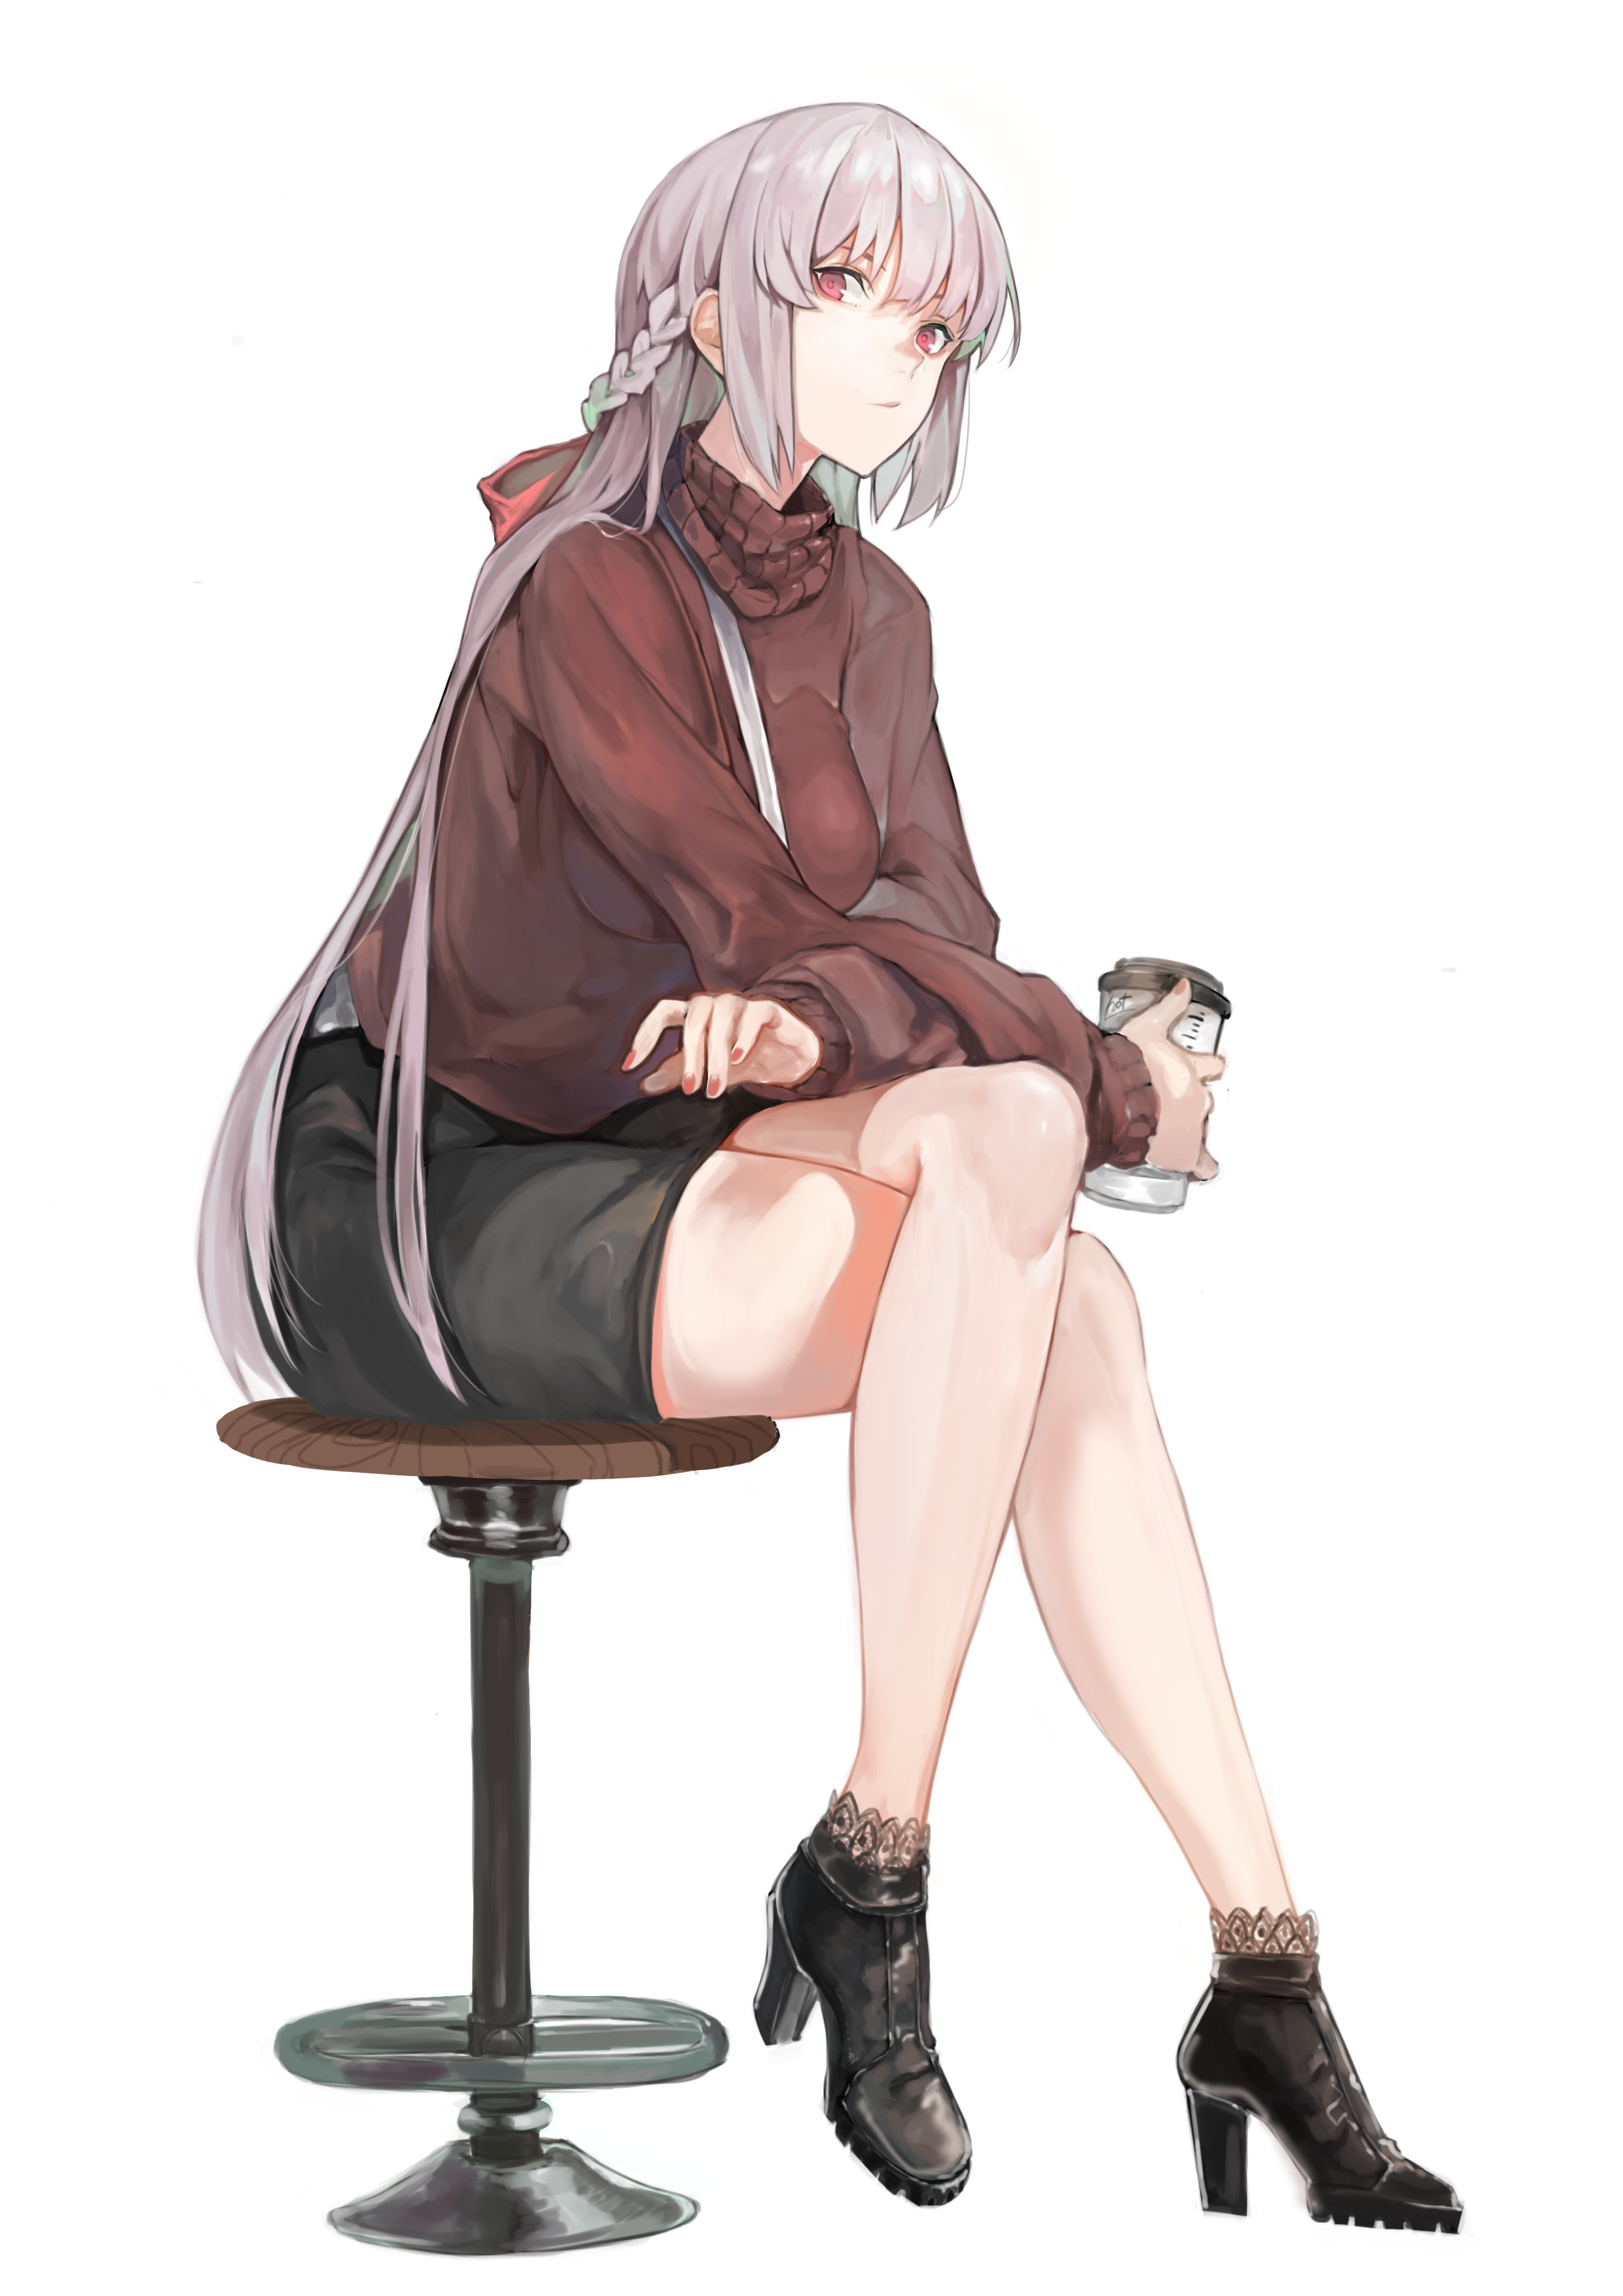 Anime Anime Girls Fate Series Fate Grand Order Florence Nightingale Fate Grand Order Long Hair Silve 2480x3508